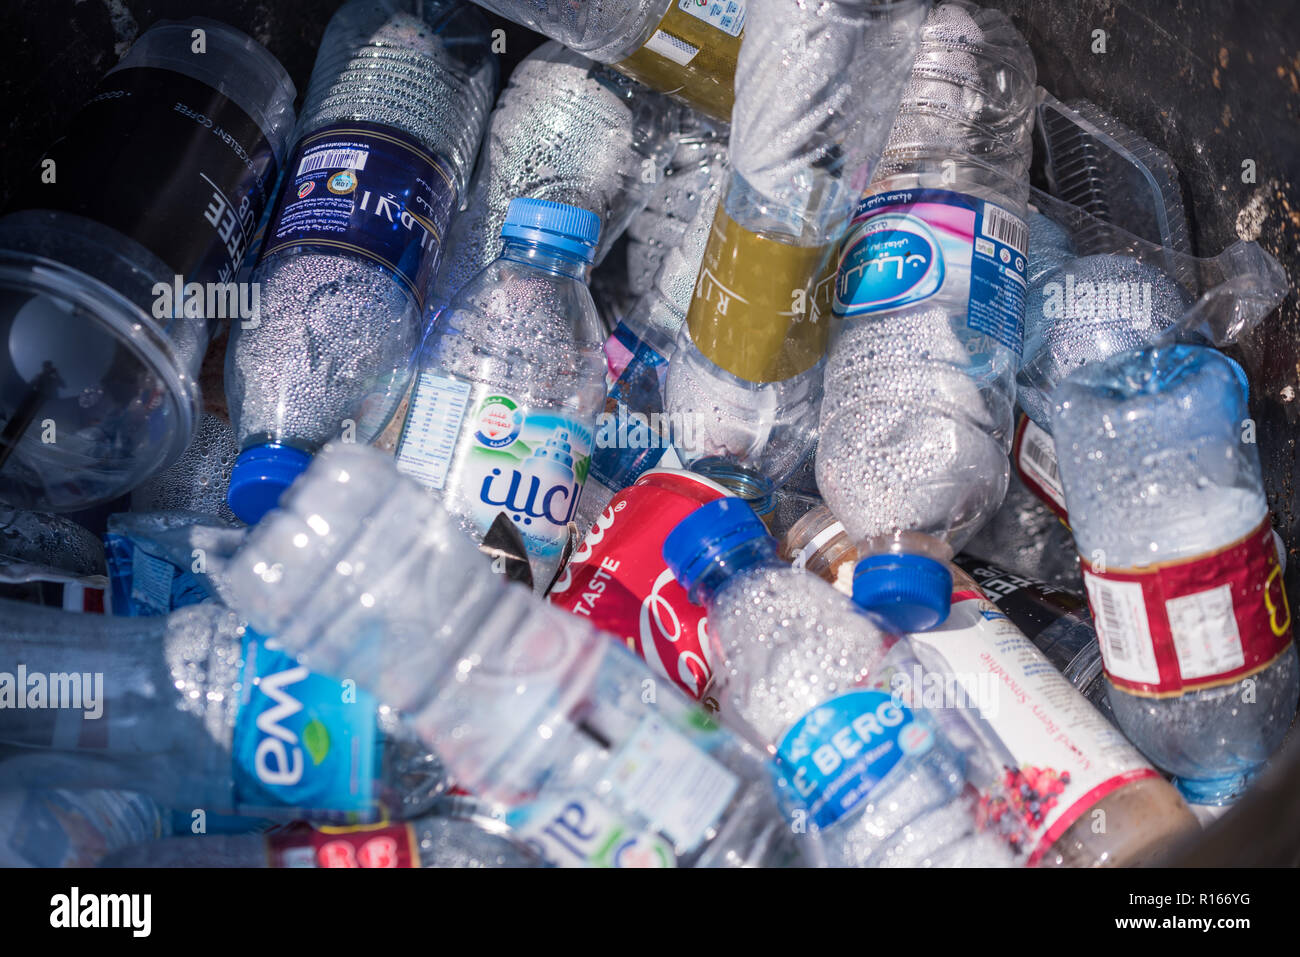 https://c8.alamy.com/comp/R166YG/detail-of-empty-water-bottle-collection-R166YG.jpg